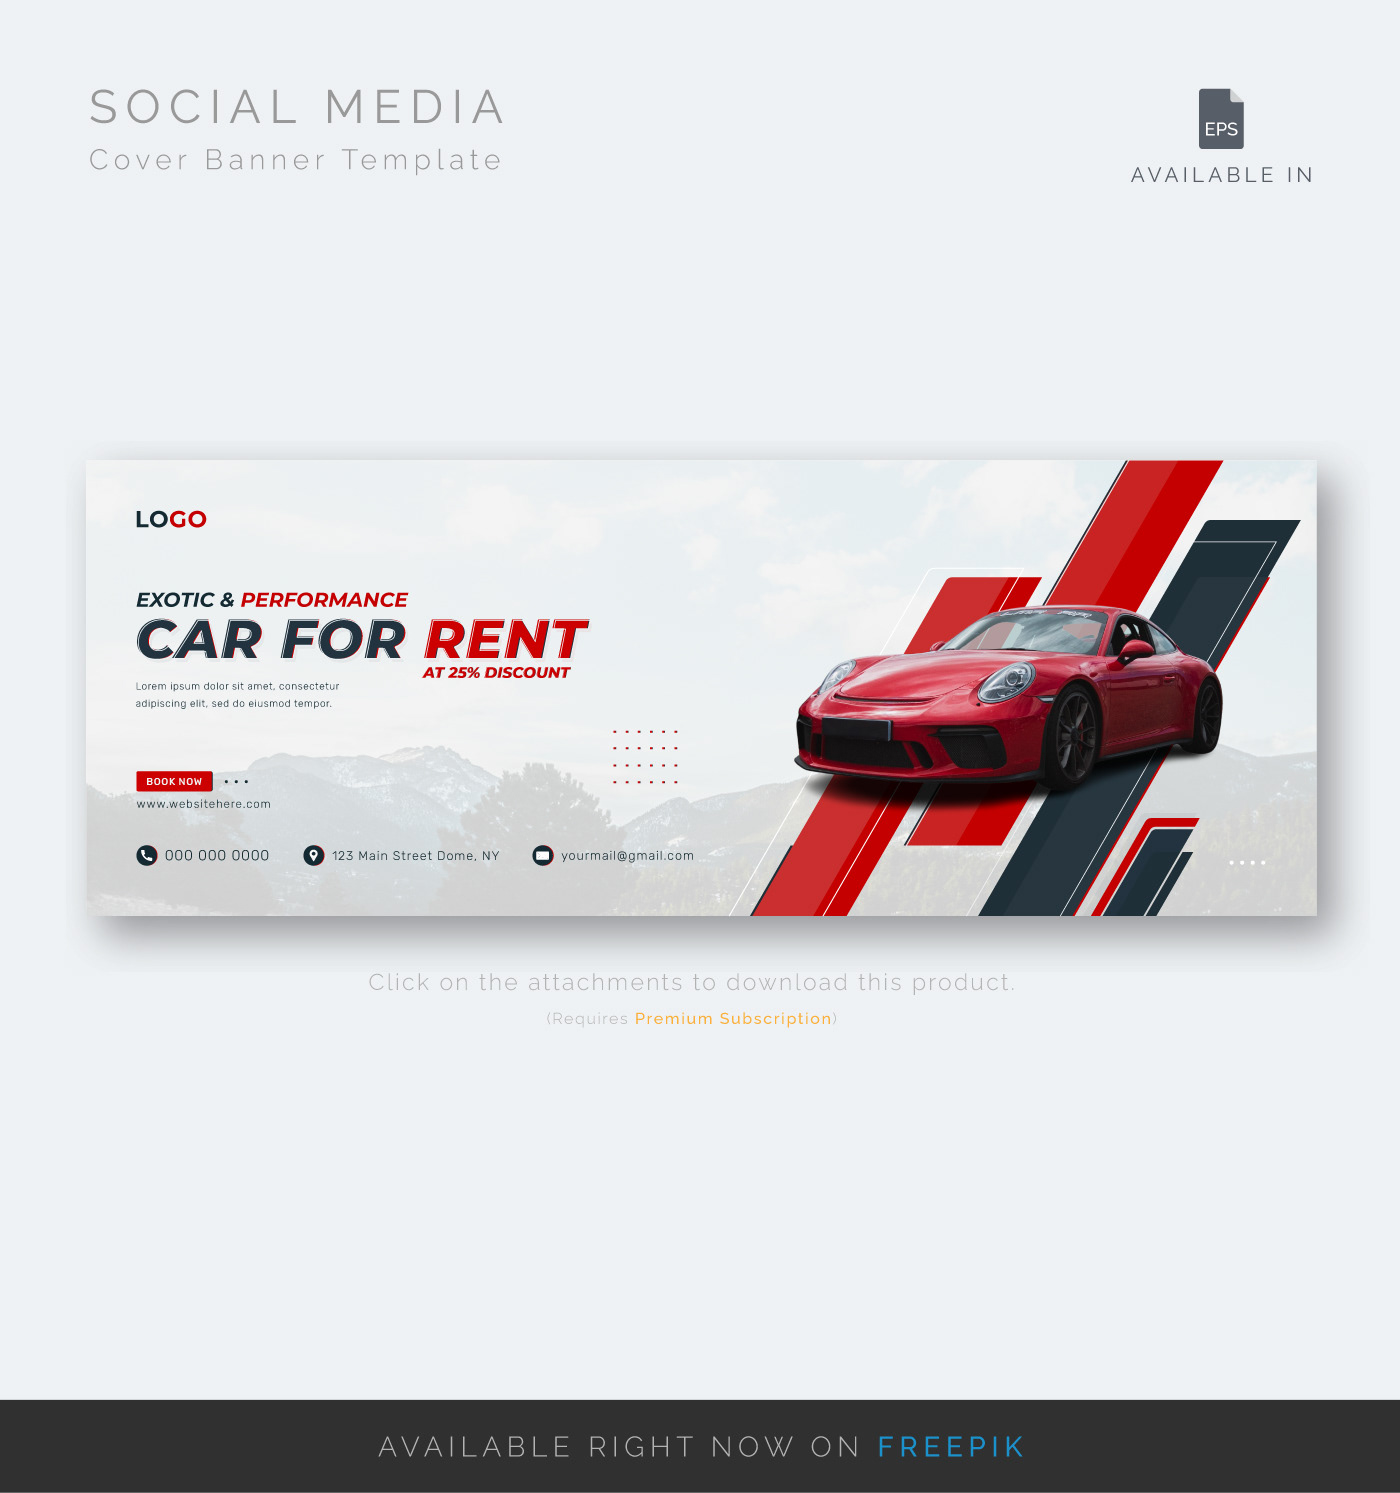 abstract banner car cover facebook marketing   Promotional red social media template